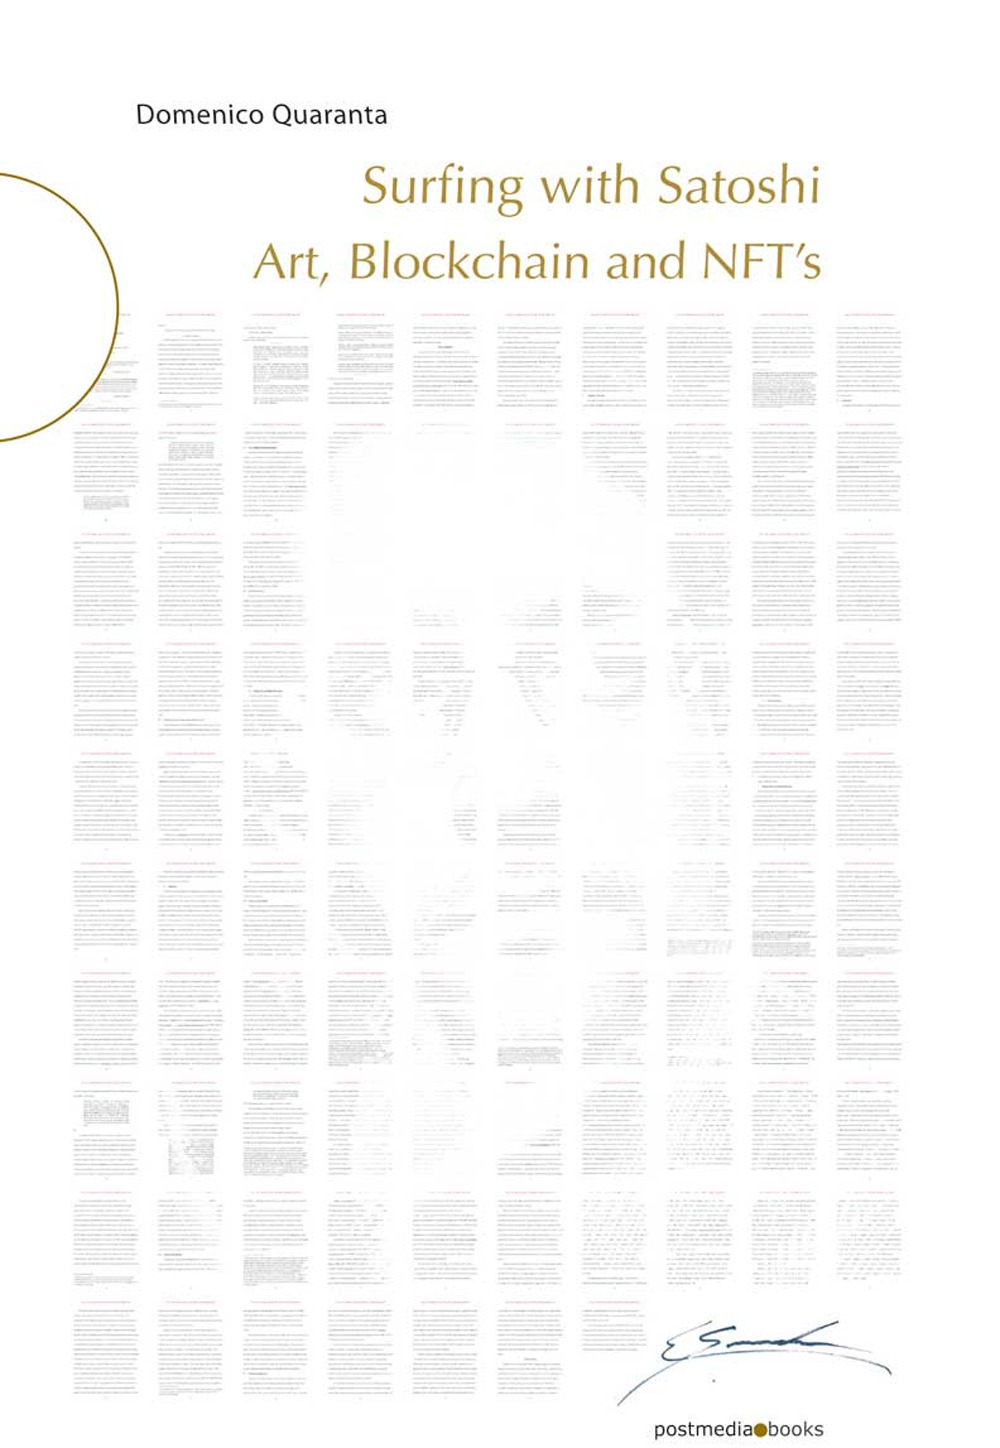 Surfing with Satoshi. Art, Blockchain and NFTs